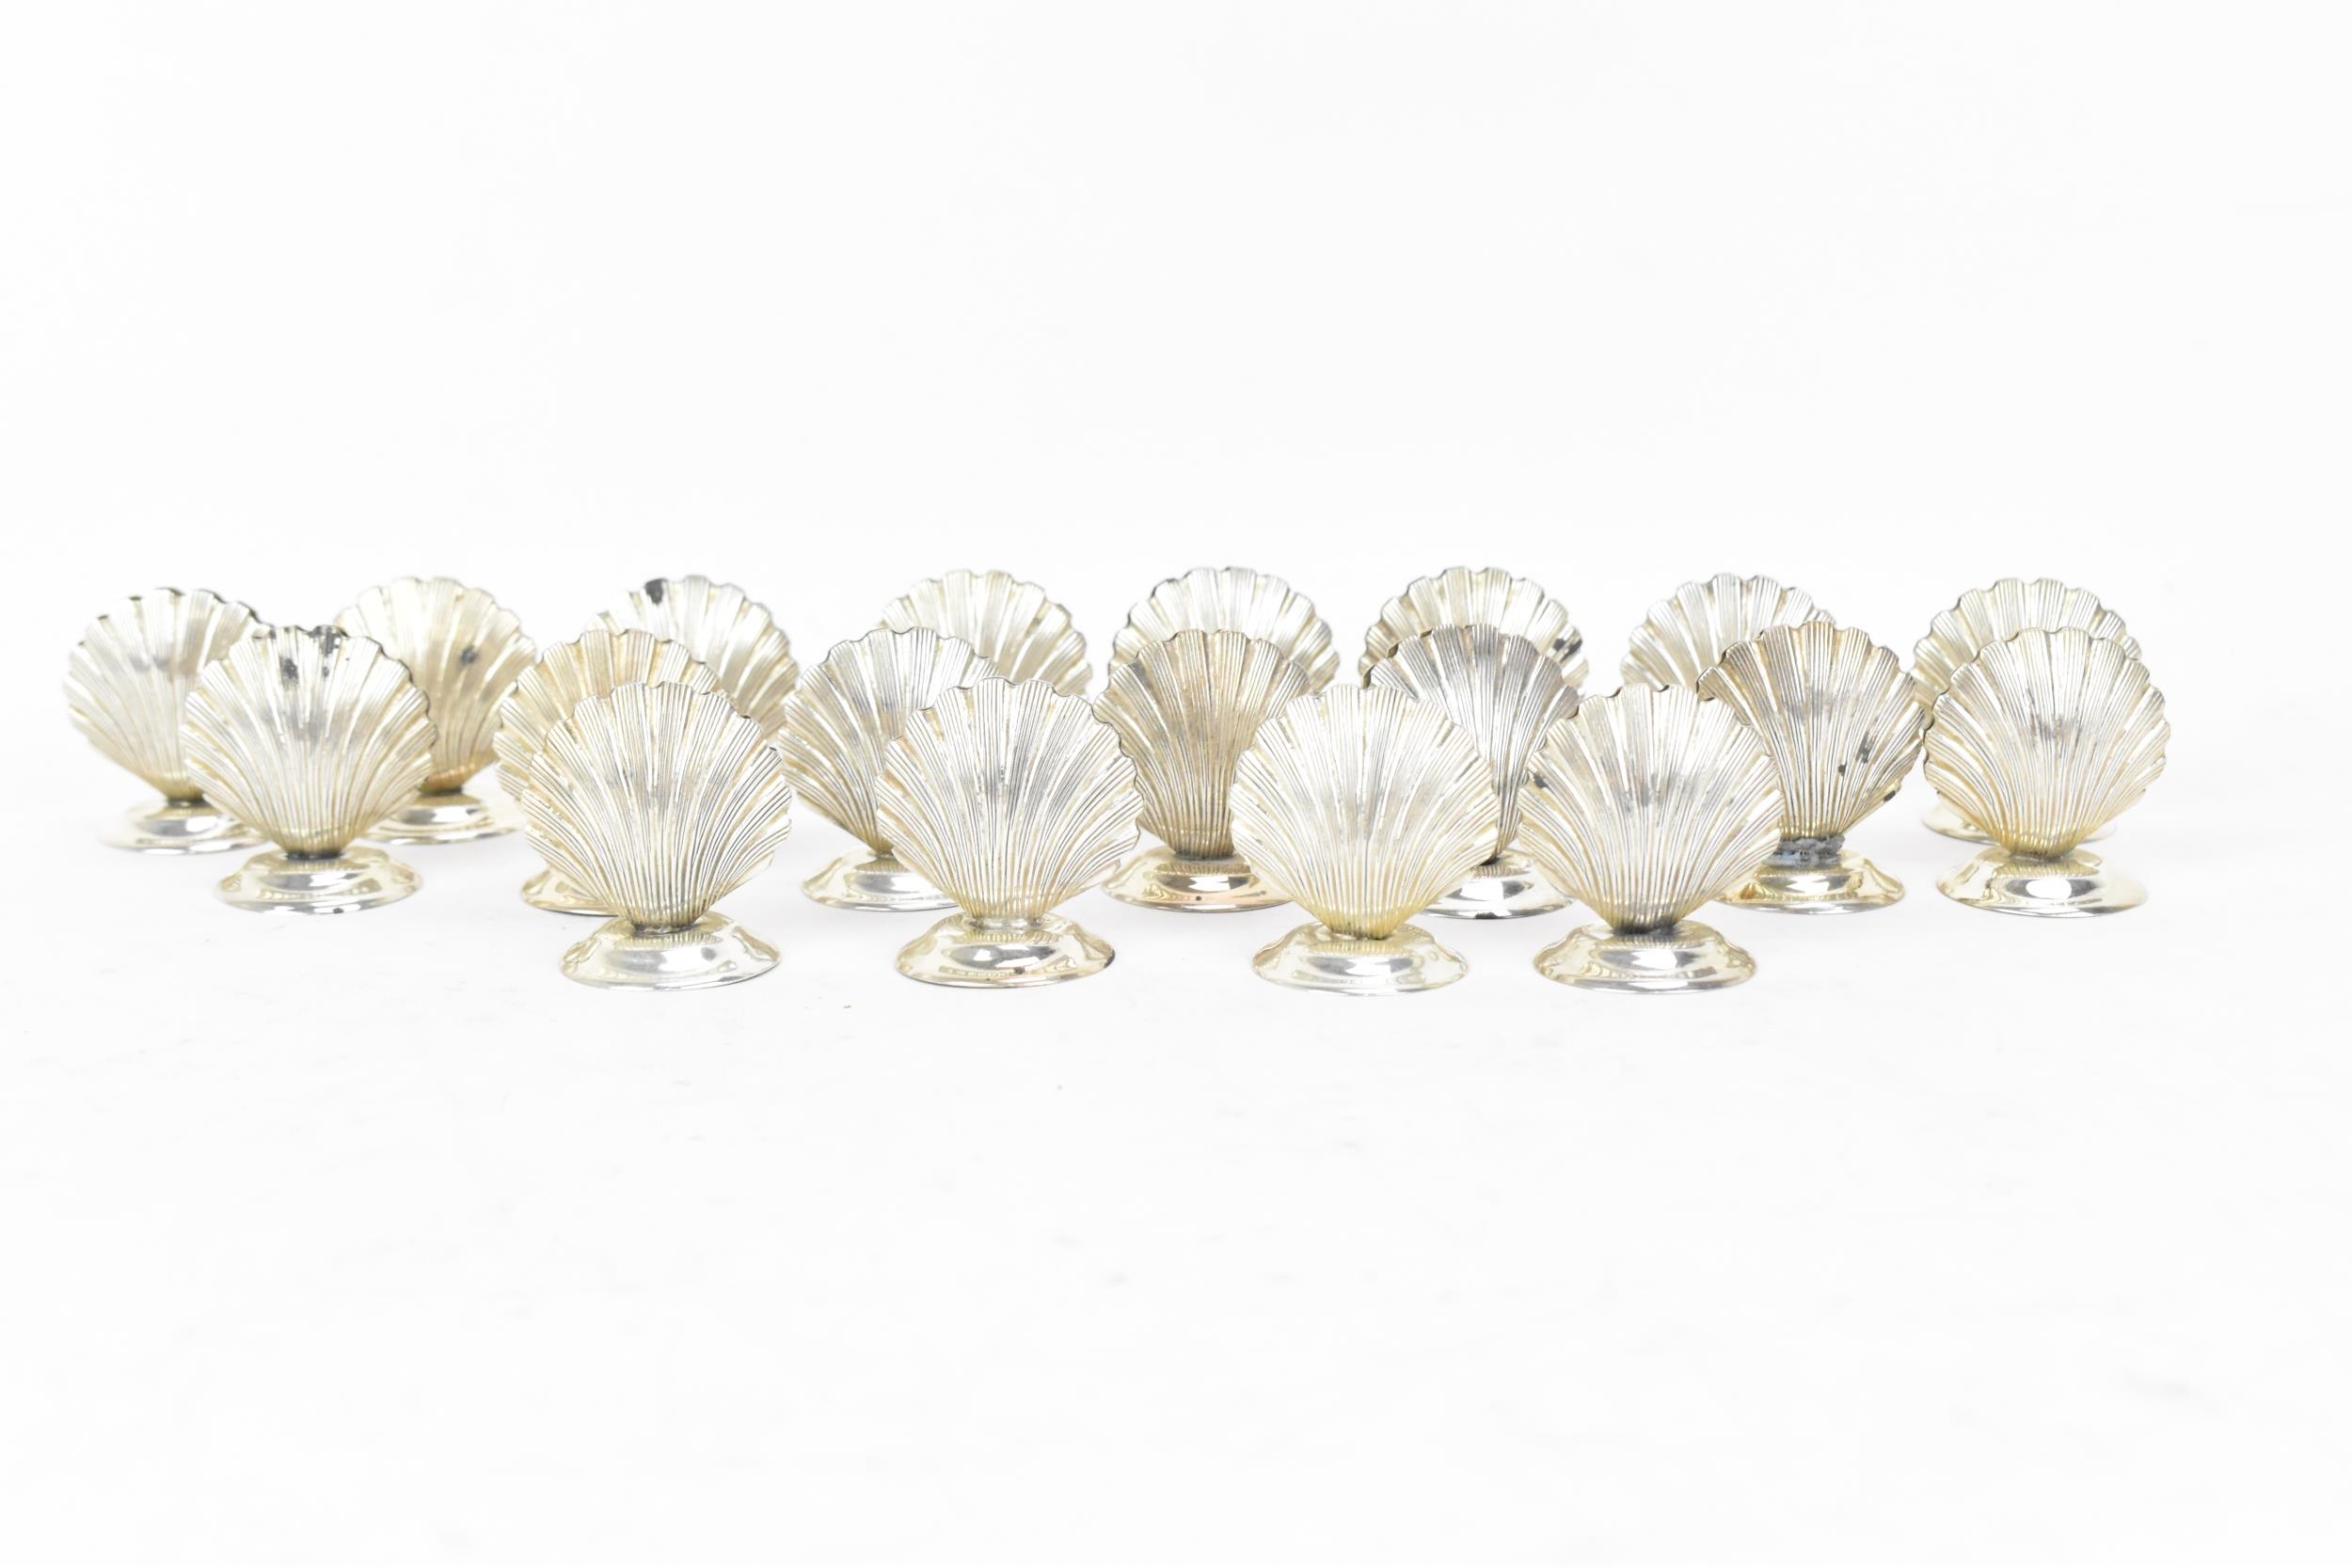 A set of sterling silver shell-shaped menu holders, or place names, each designed as a clam shell - Image 3 of 6